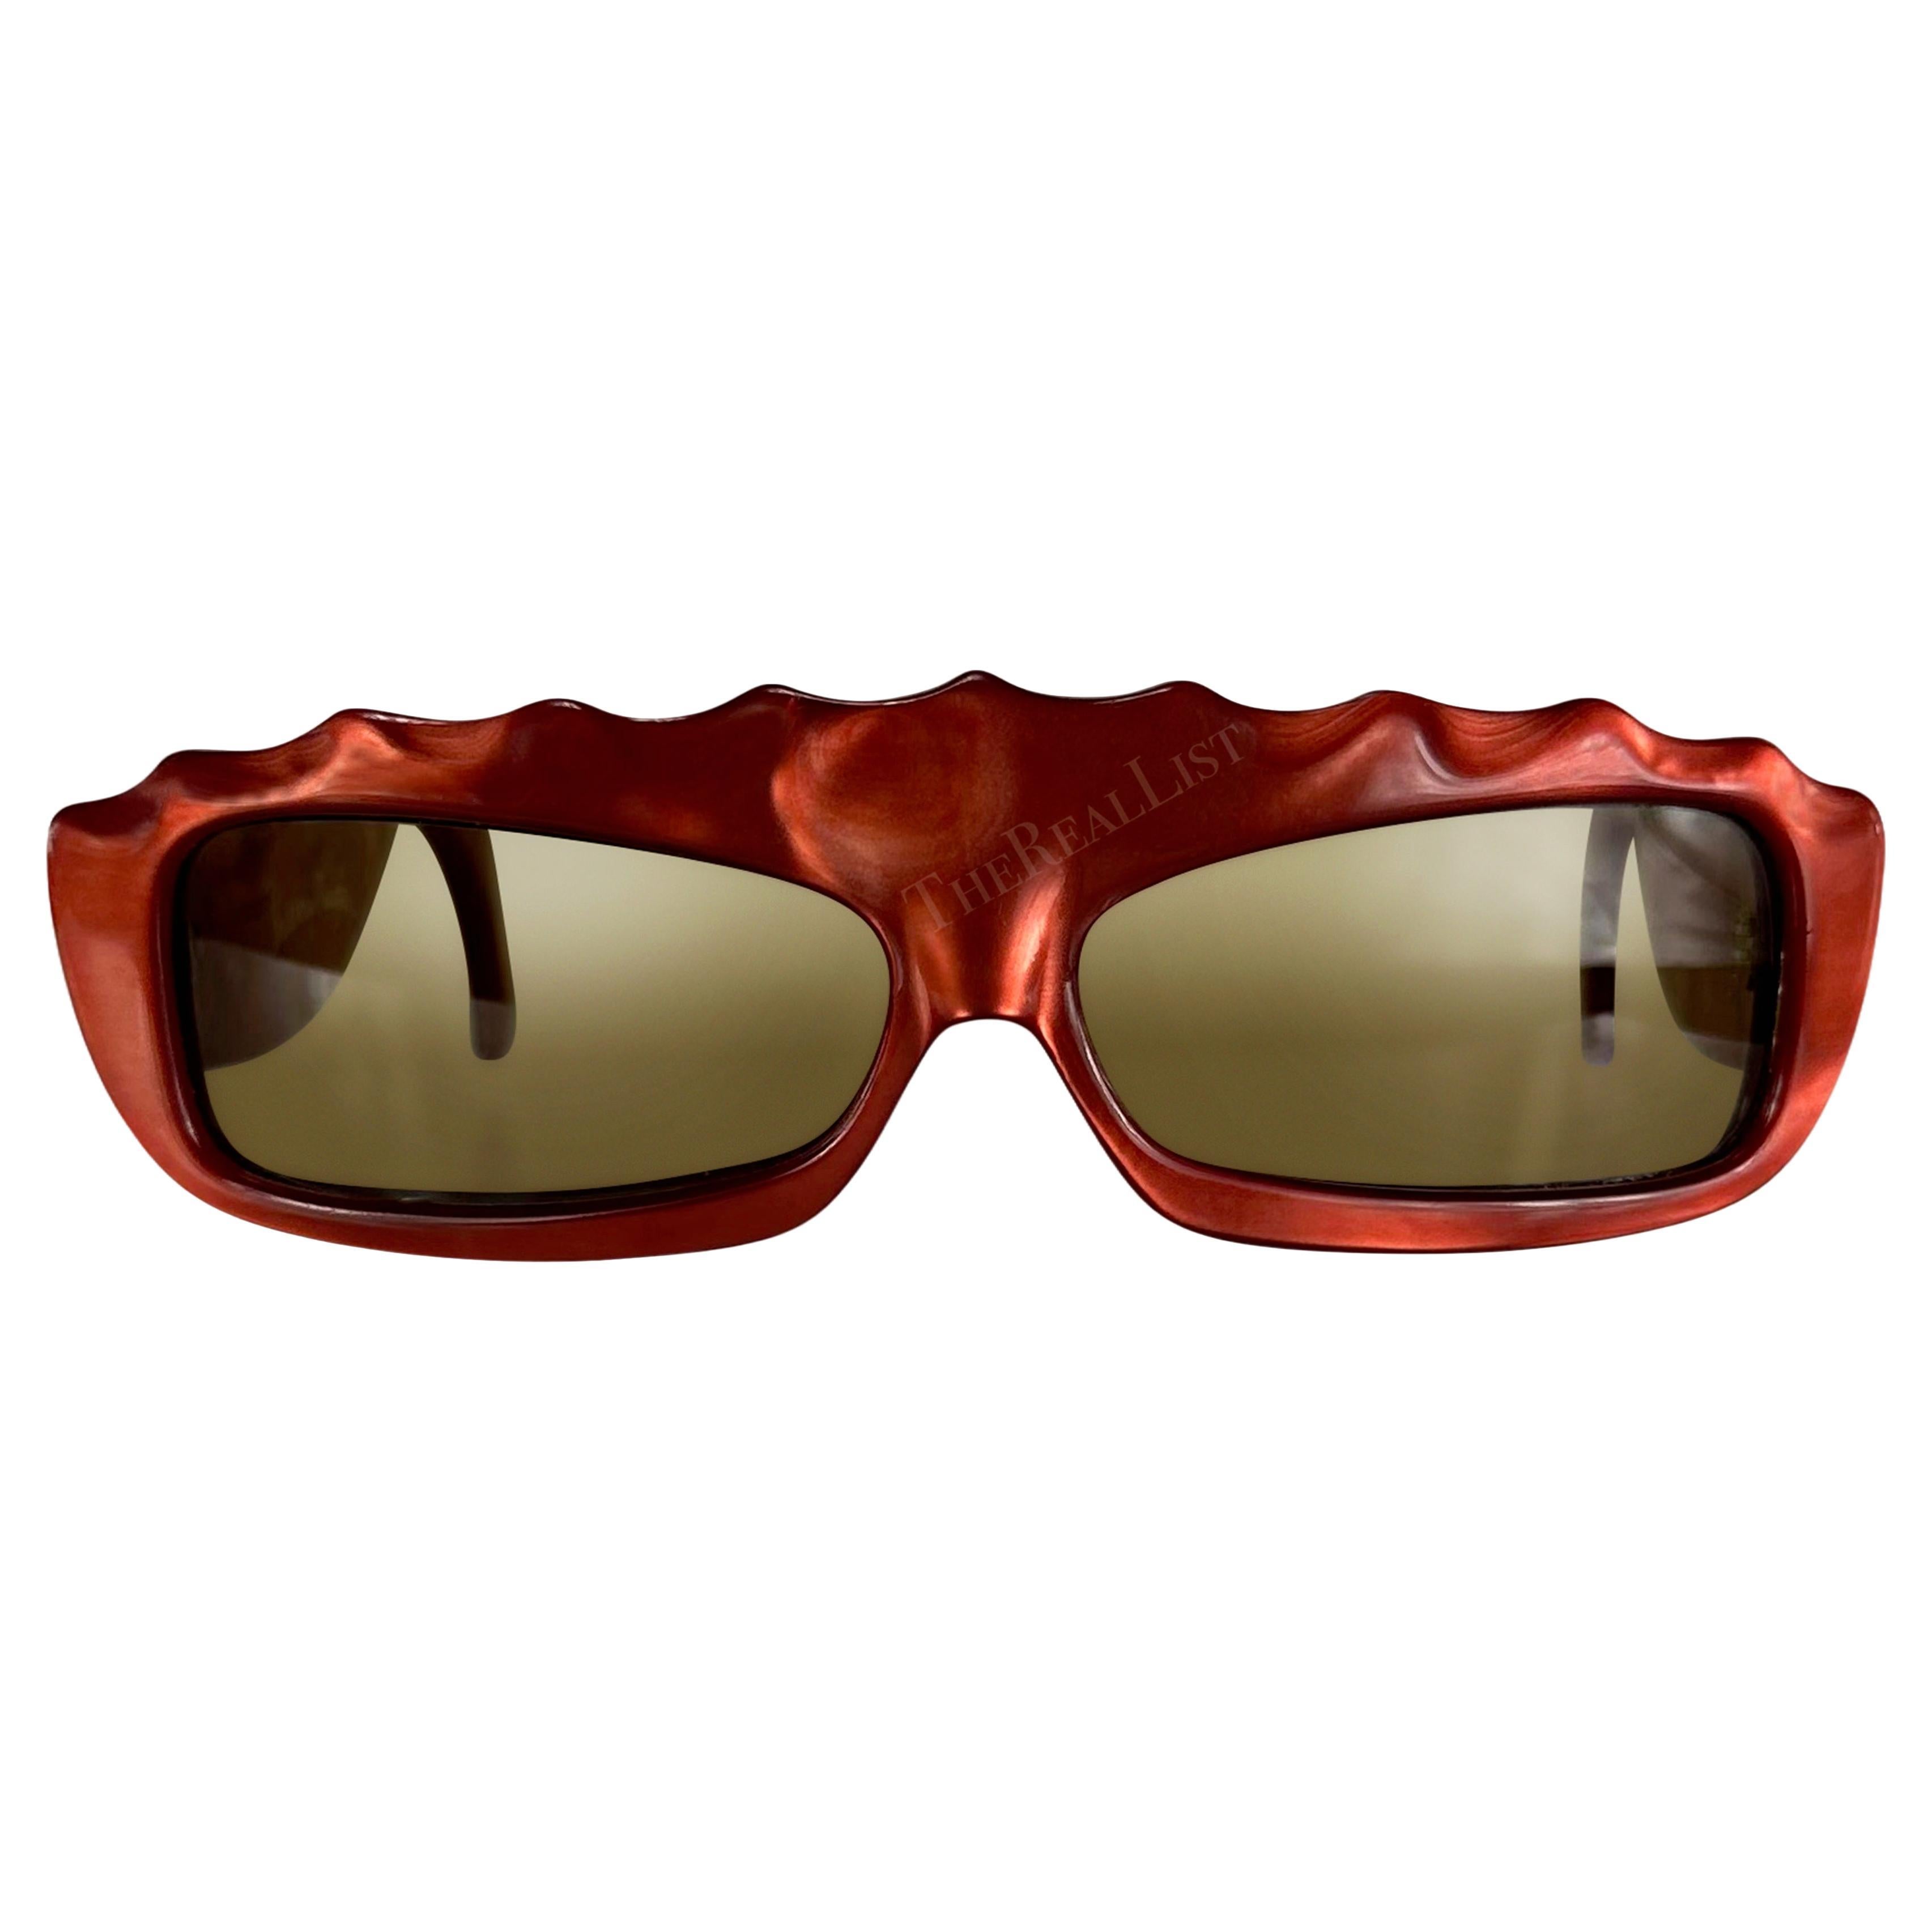 S/S 1979 Thierry Mugler Red Opalescent Red Sculpted Rectangular Sunglasses For Sale